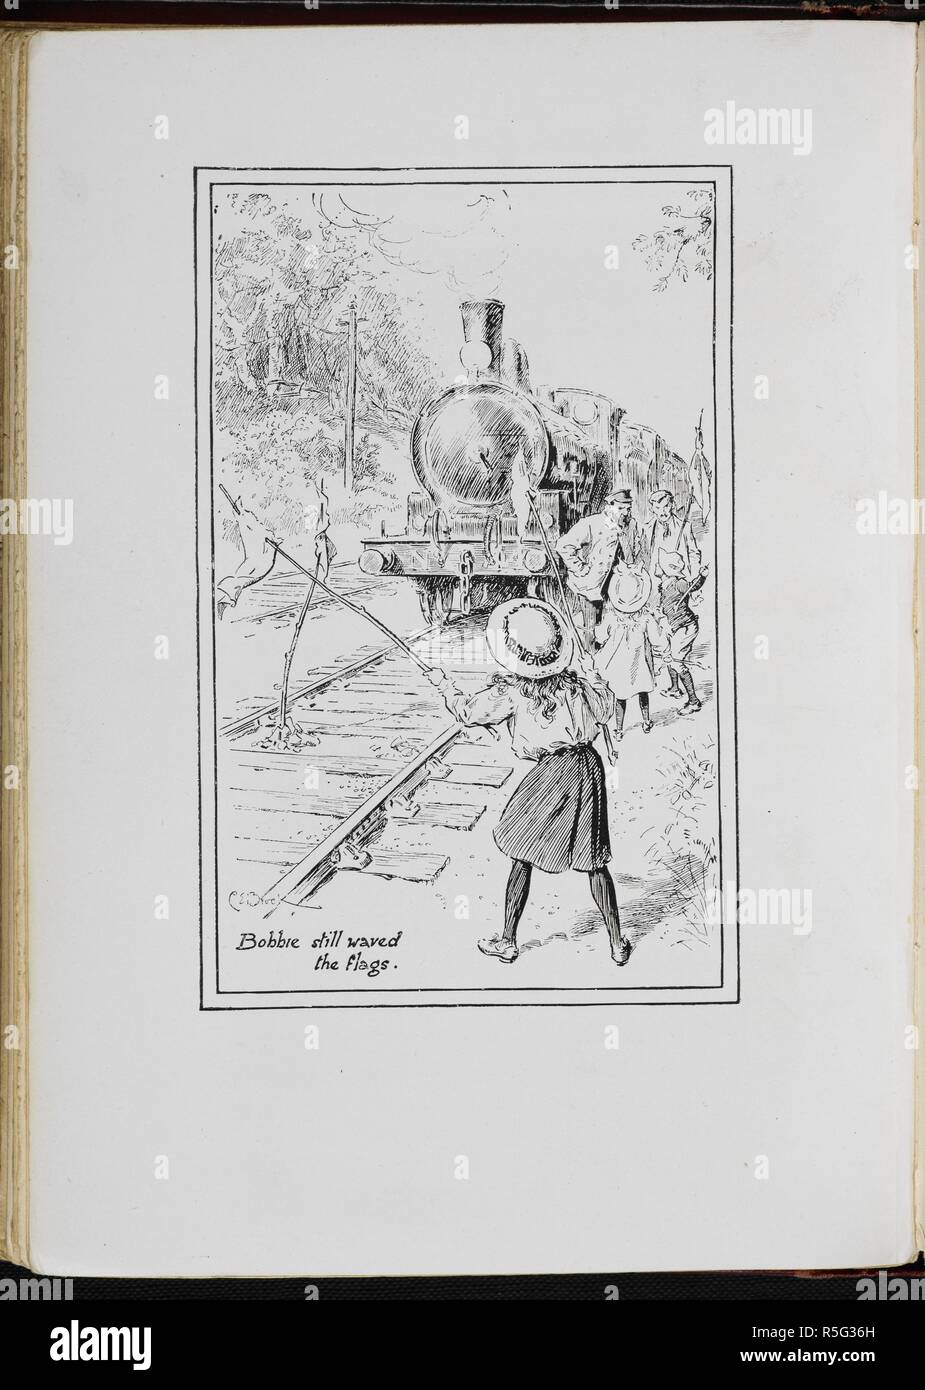 Bobbie still waived the flags. The Railway Children With drawings by C E Brock. London : Wells Gardner & Co., 1906. Source: 12813.y.7 page 135. Language: English. Author: Brock, Charles Edmund. Nesbit, afterwards Bland, Edith. Stock Photo